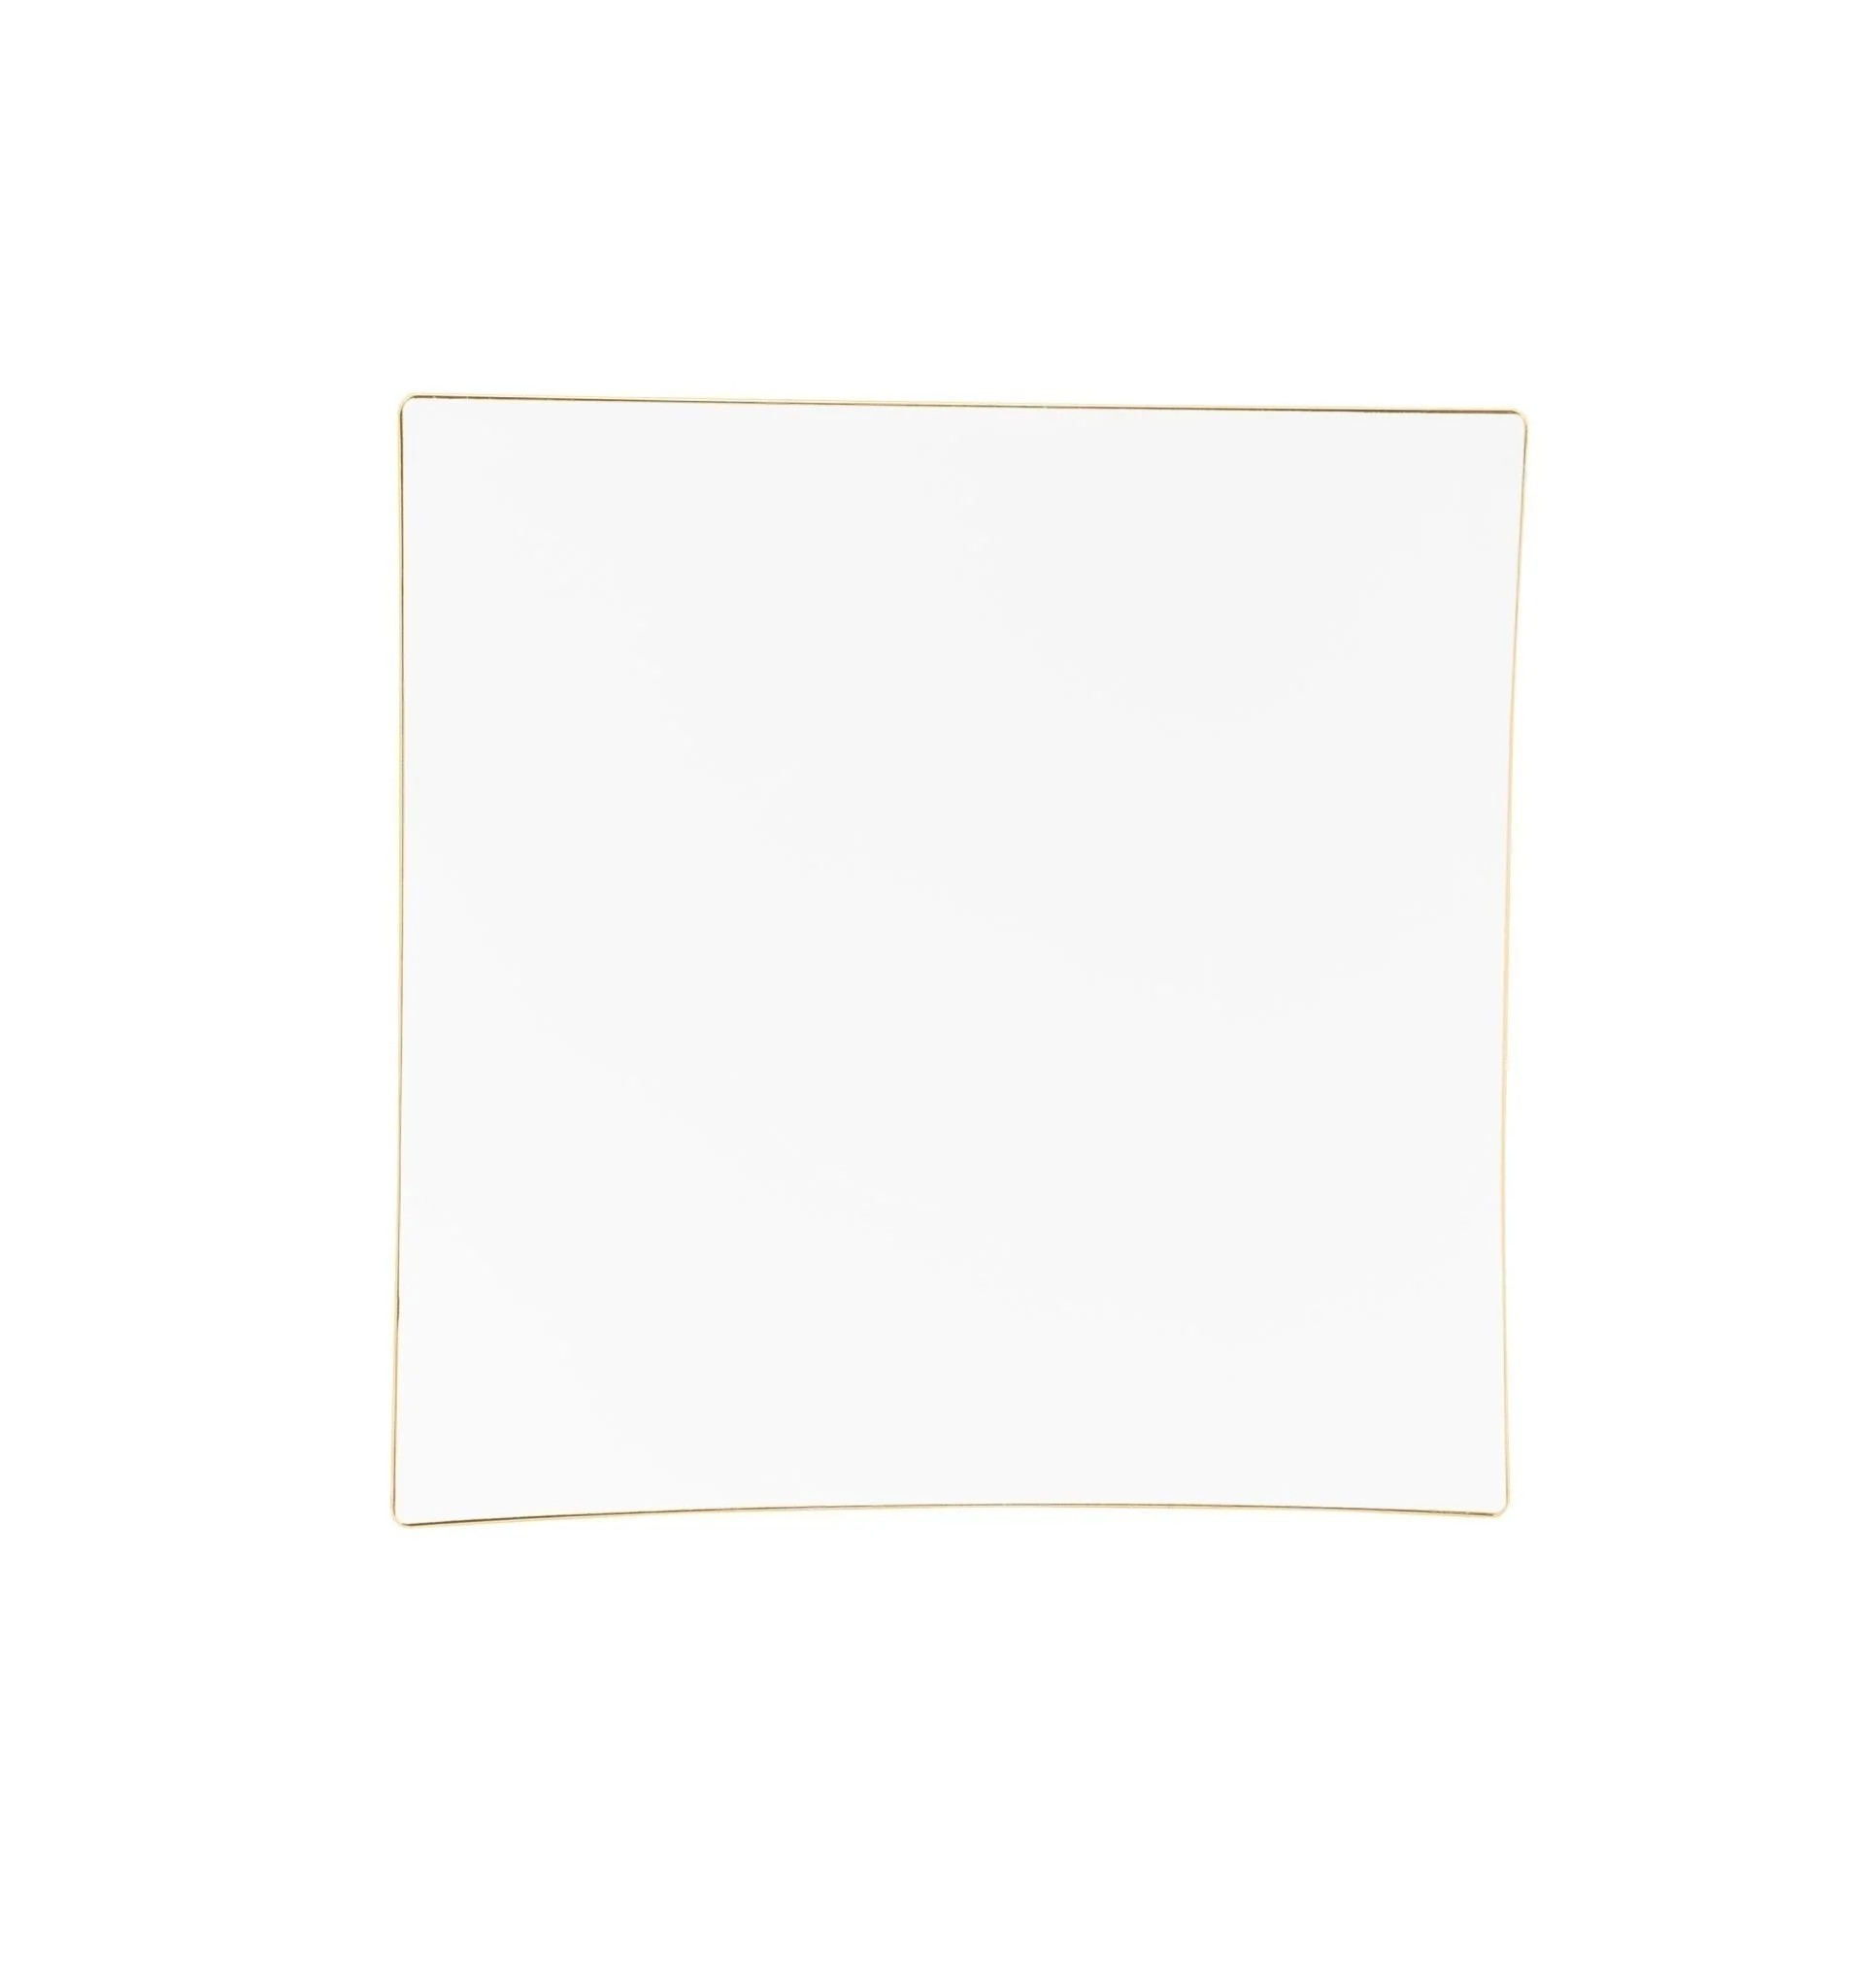 Luxe Party Square White with Gold Trim Plastic Dinner Plate 10.5